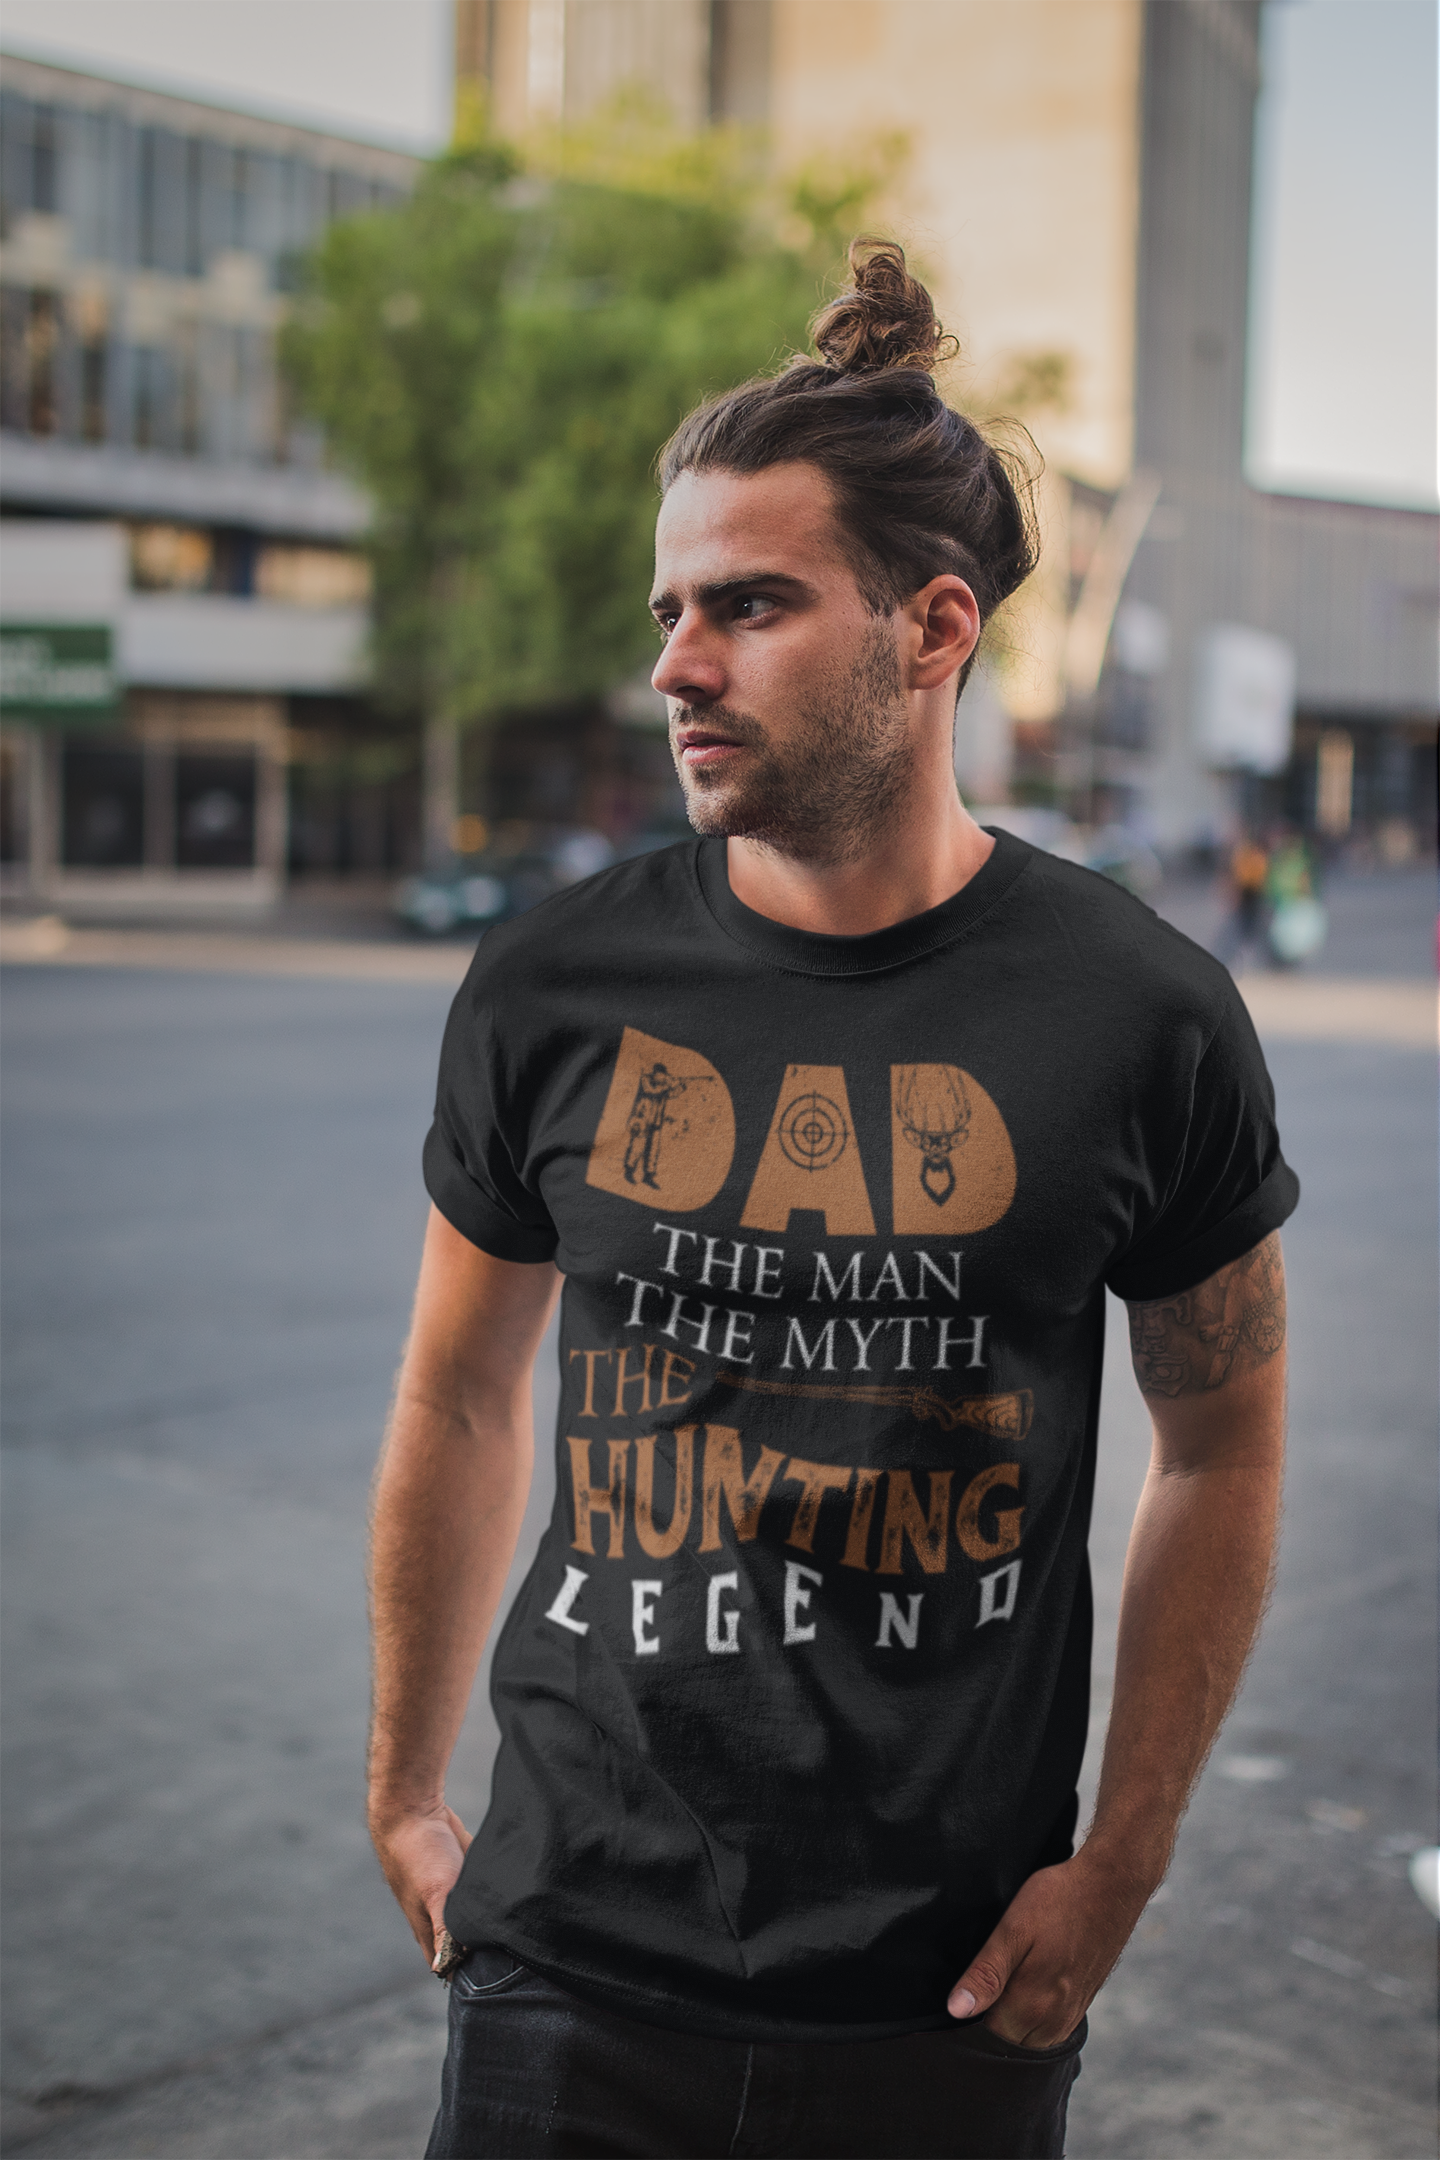 ULTRABASIC Graphic Men's T-Shirt Dad The Man The Myth The Hunting Legend - Funny Hunter's Tee Shirt